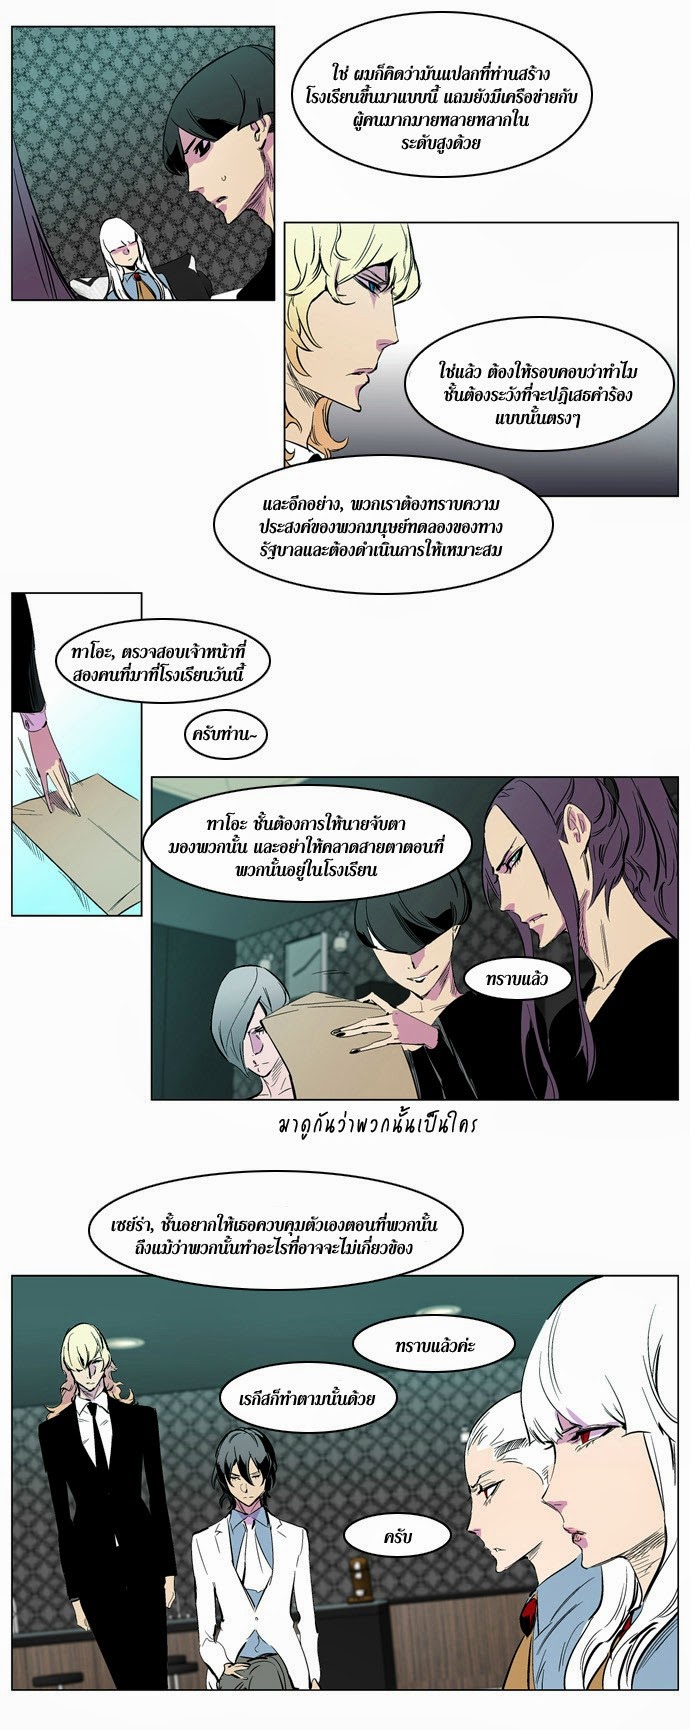 Noblesse 205 016